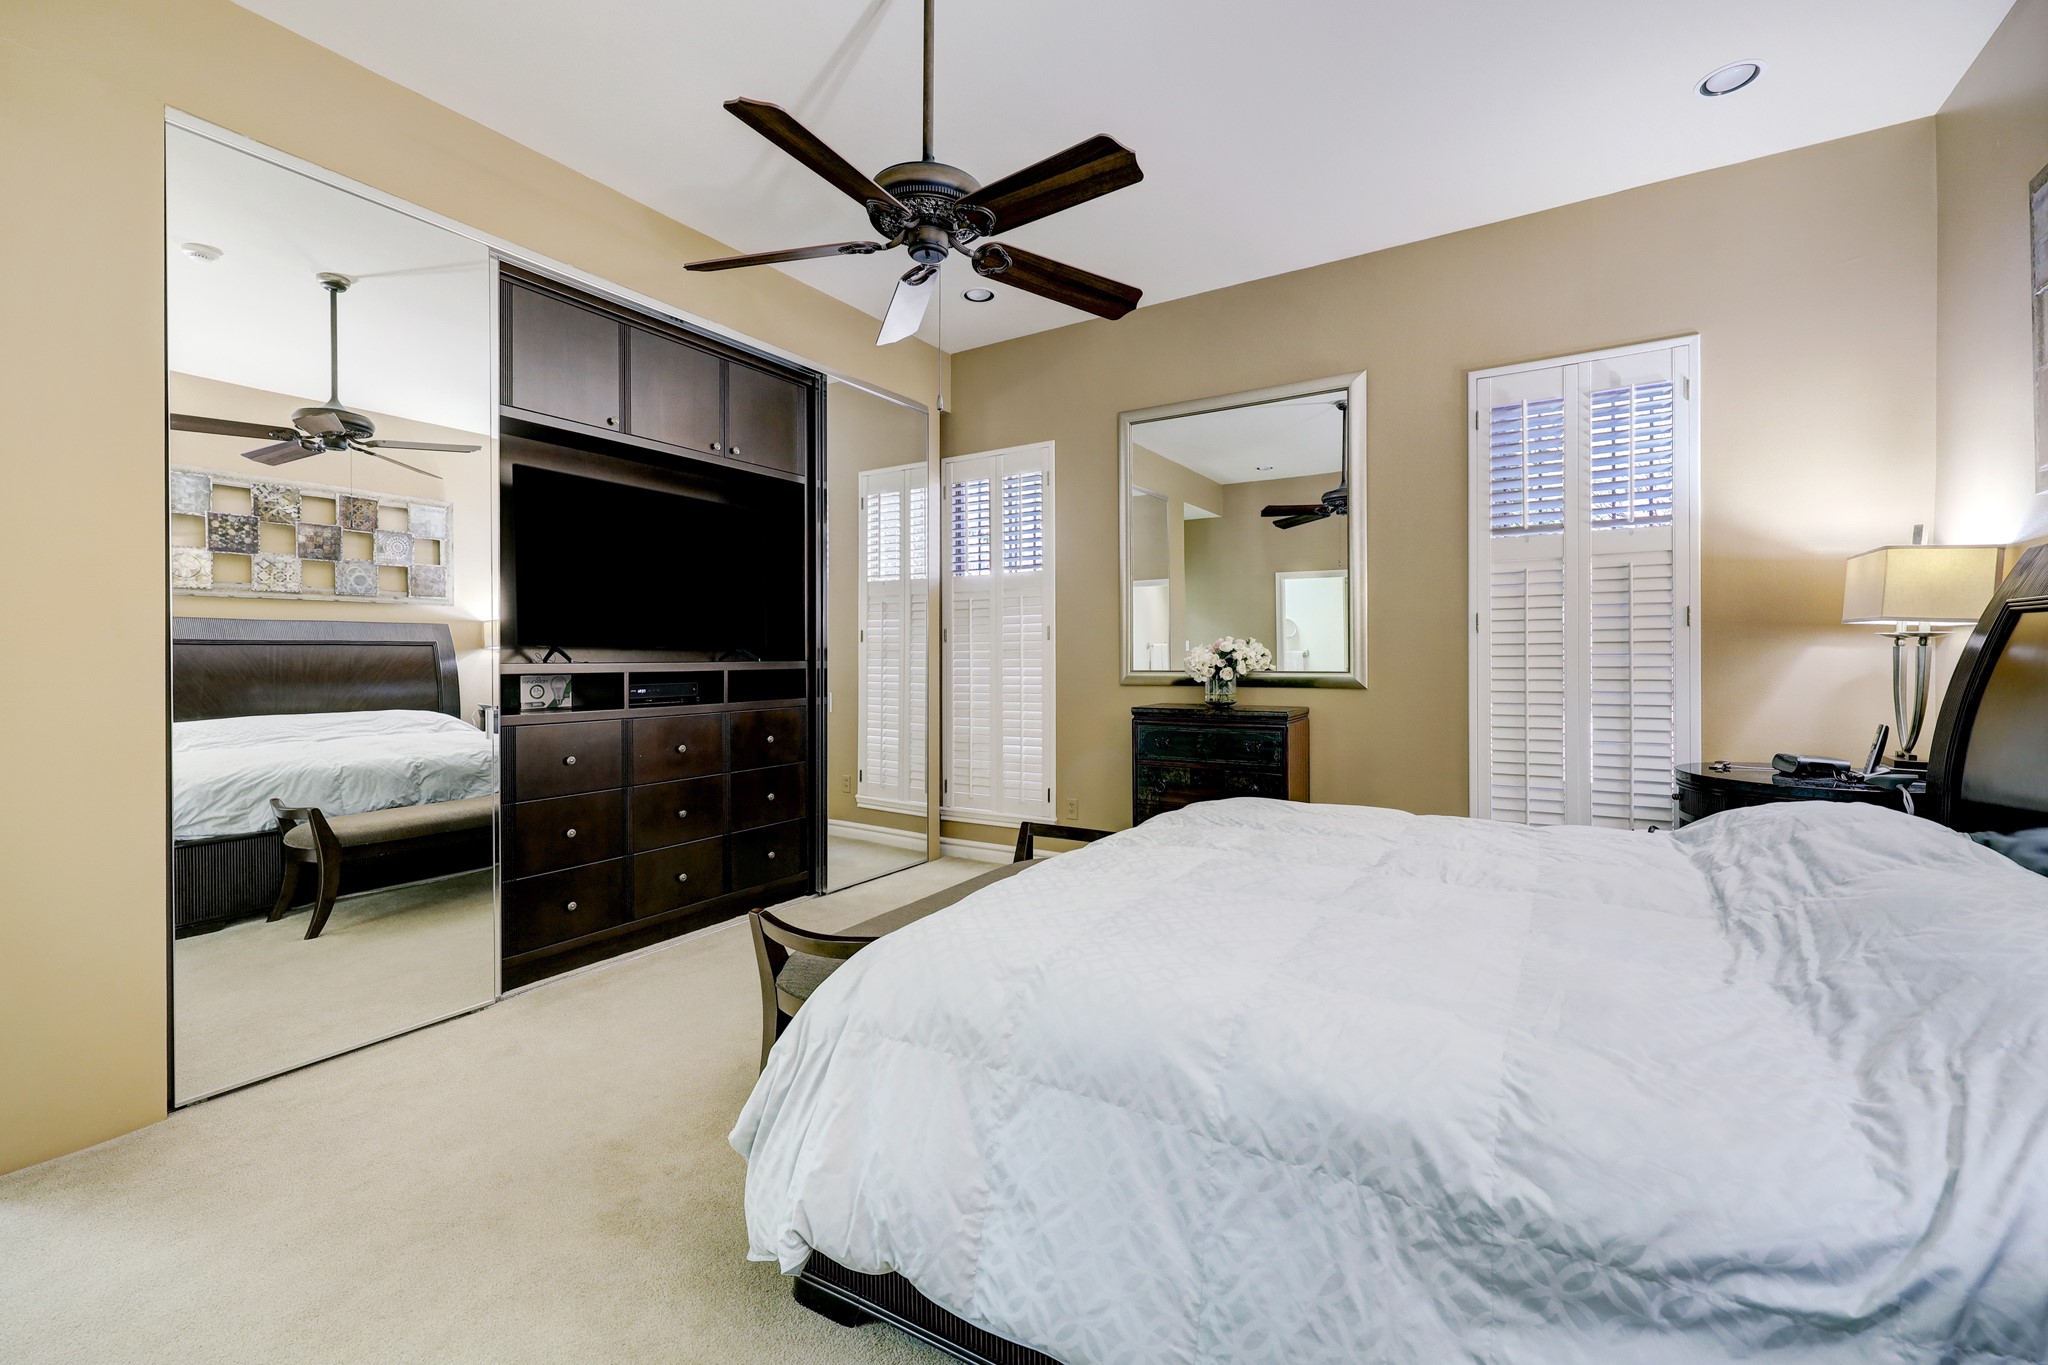 PRIMARY BEDROOM WITH MIRRORED SLIDING DOORS CONCEALING BUILT IN STORAGE AND ENTERTAINMENT CENTER